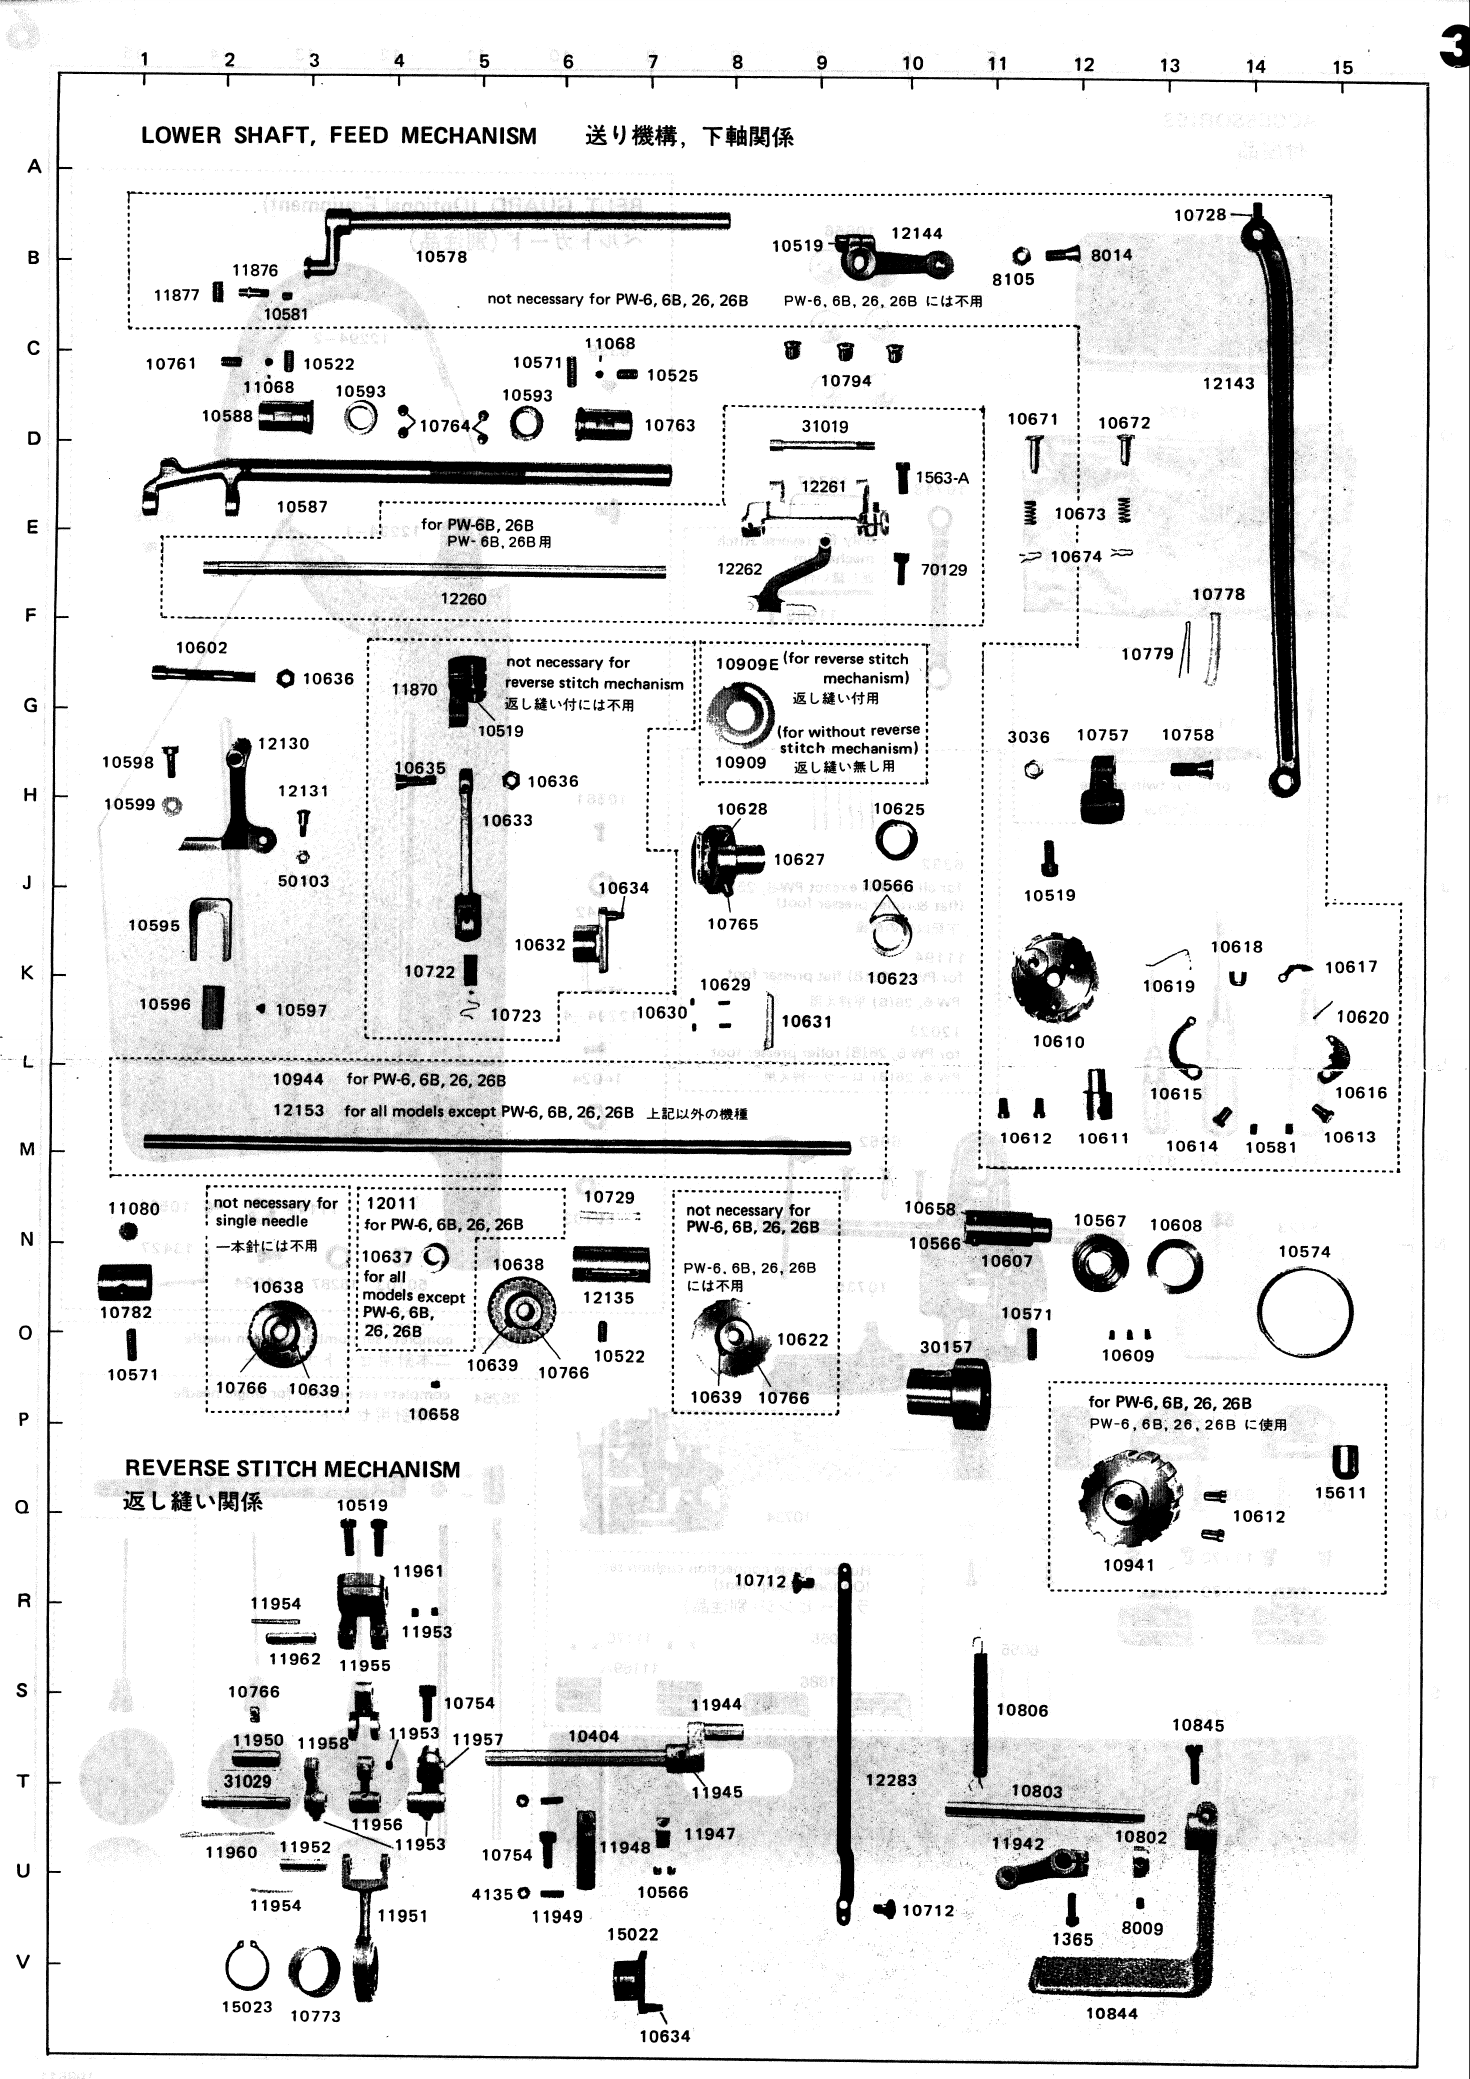 Page 3 of 6 - ACE&EASTMAN Consew 359 Parts Book Image To PDF Conversion Tools User Manual